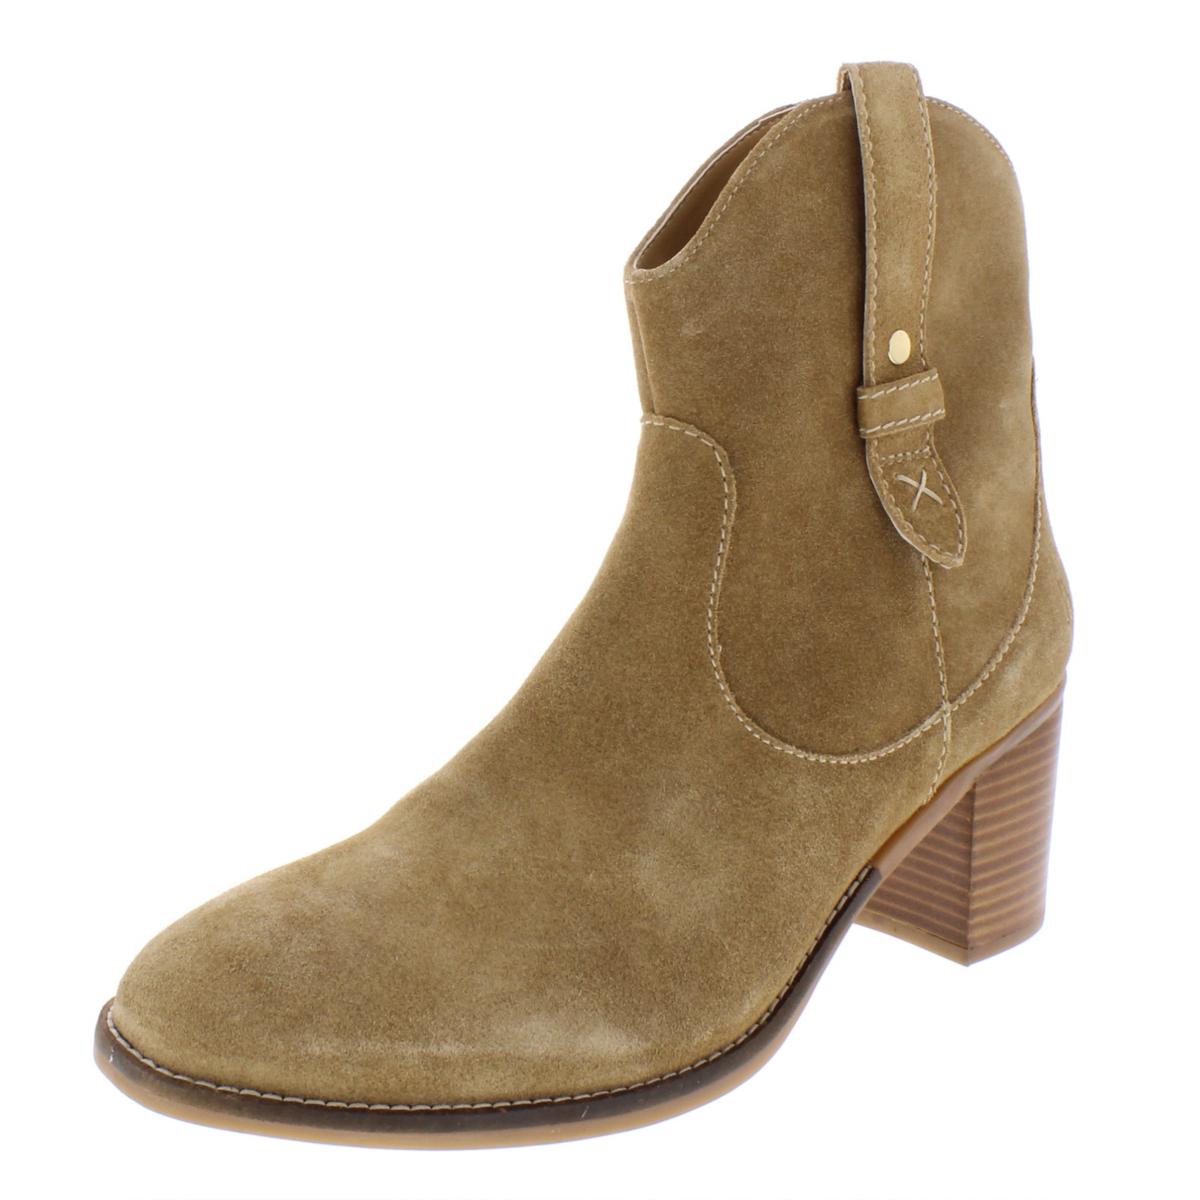 Hush Puppies Womens Hannah Mid Suede Block Heel Ankle Boots Shoes BHFO ...